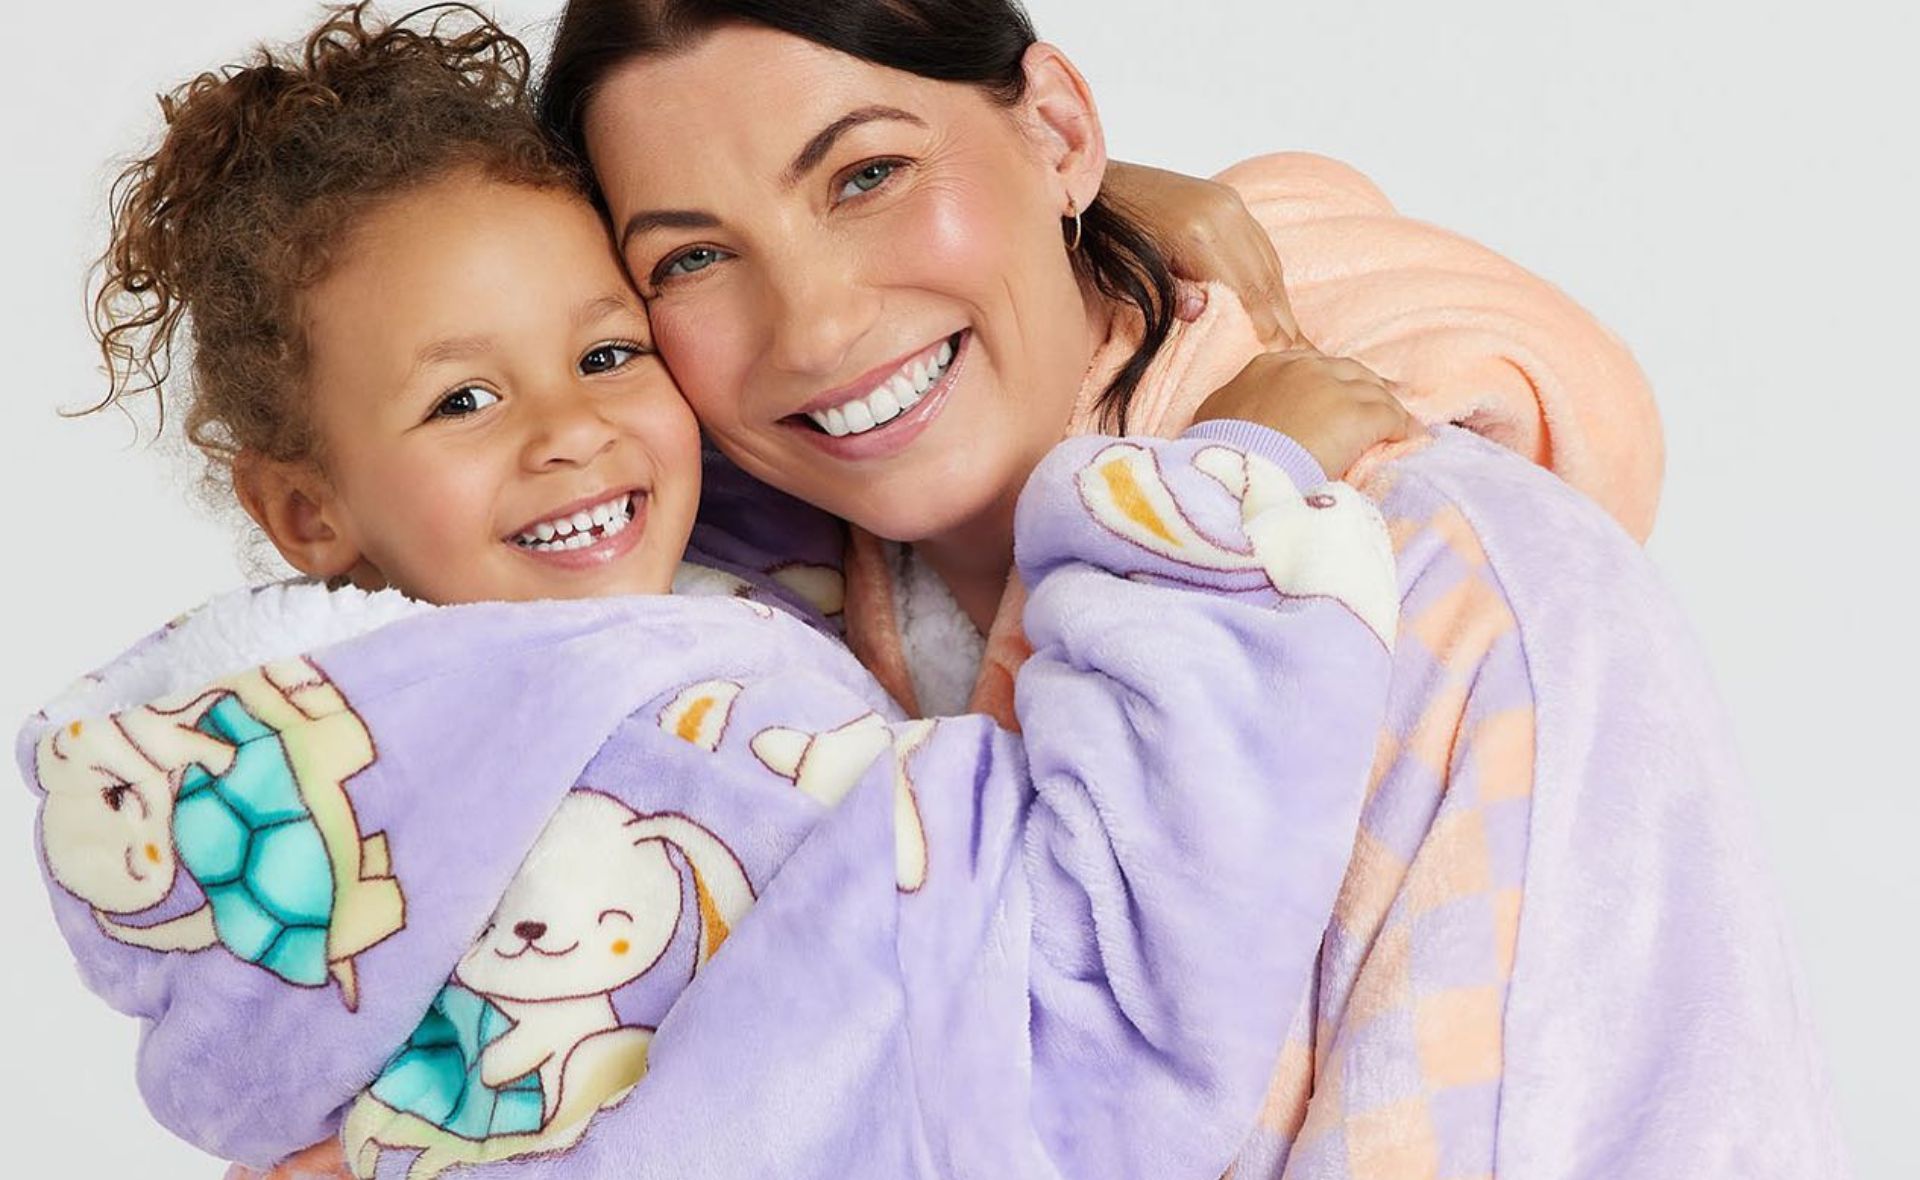 Wrap your little ones up in wearable blankets this winter